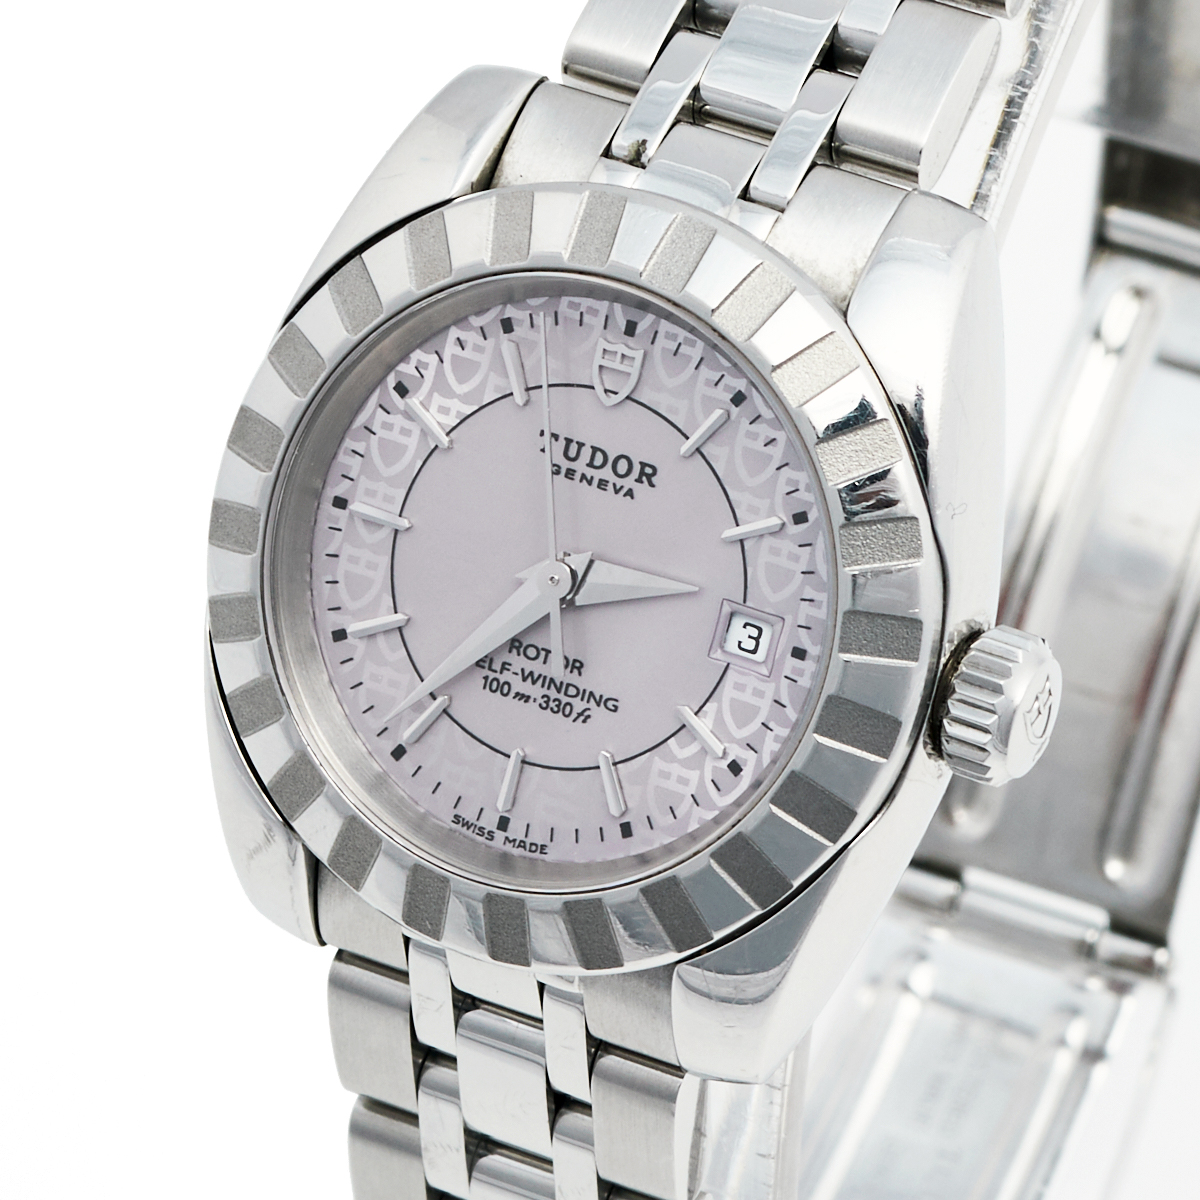 

Tudor Silver Stainless Steel Classic